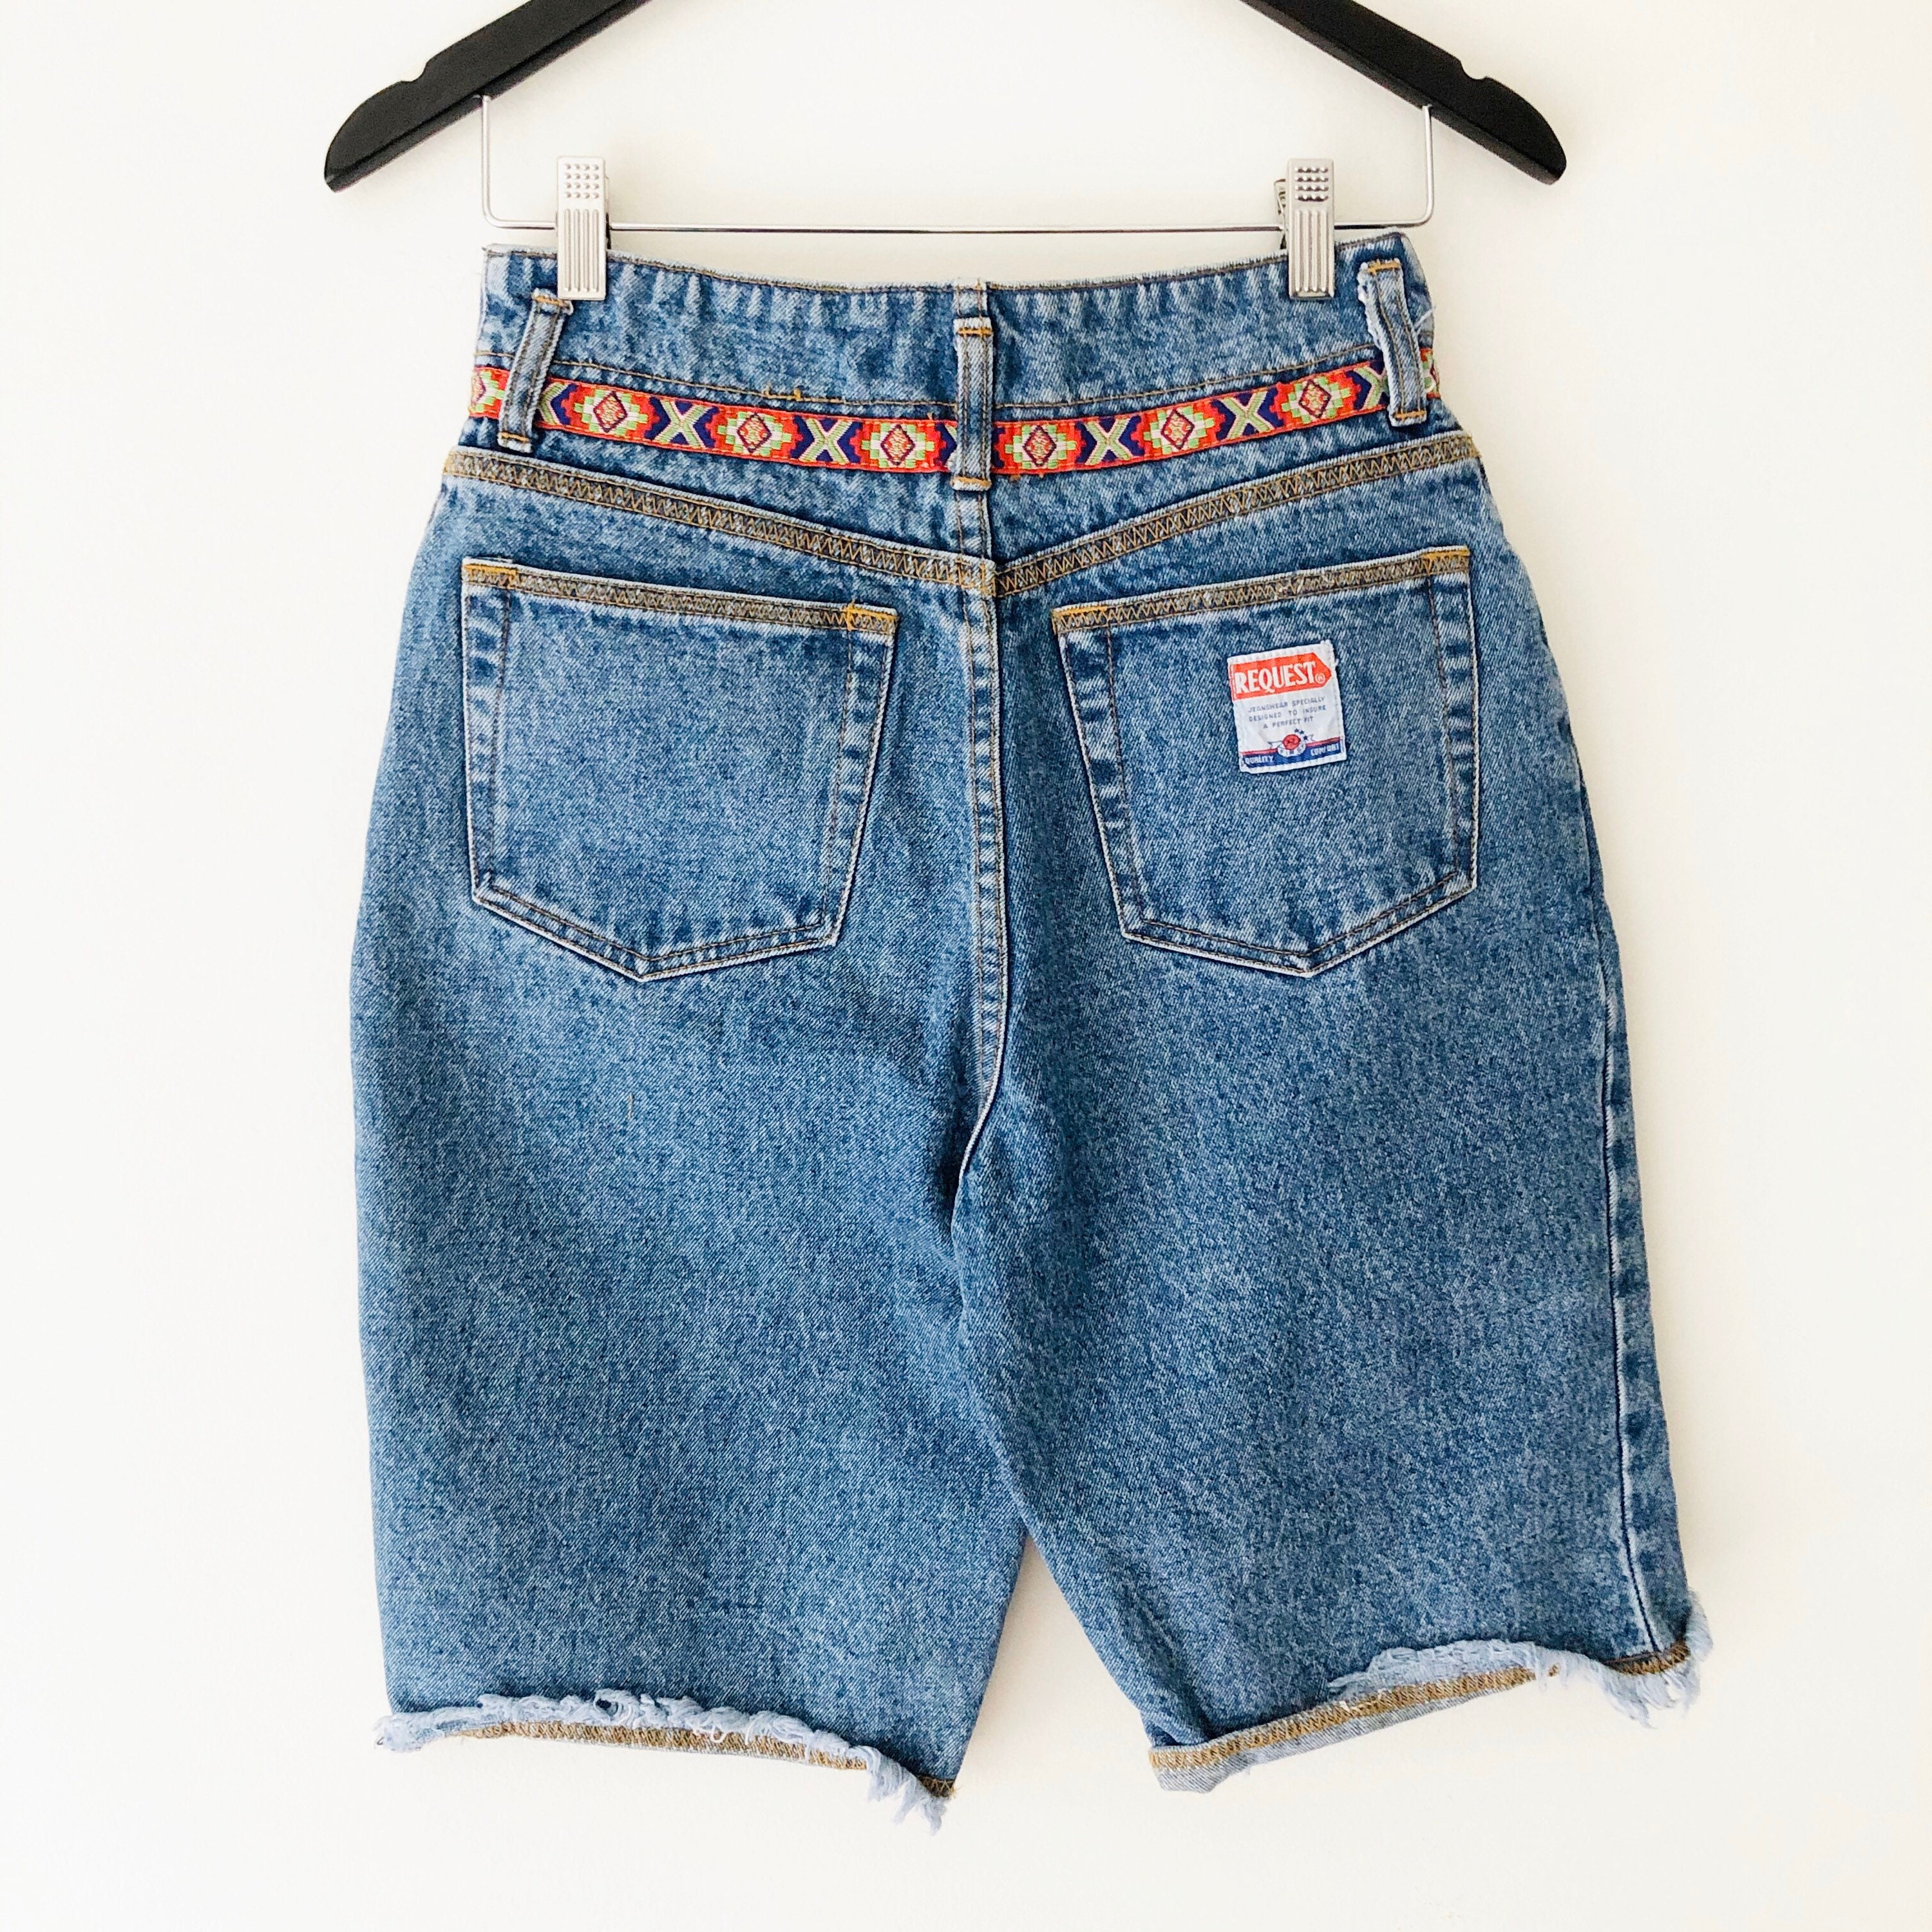 Vintage 90s Request Jeans High Waisted Blue Denim Shorts With